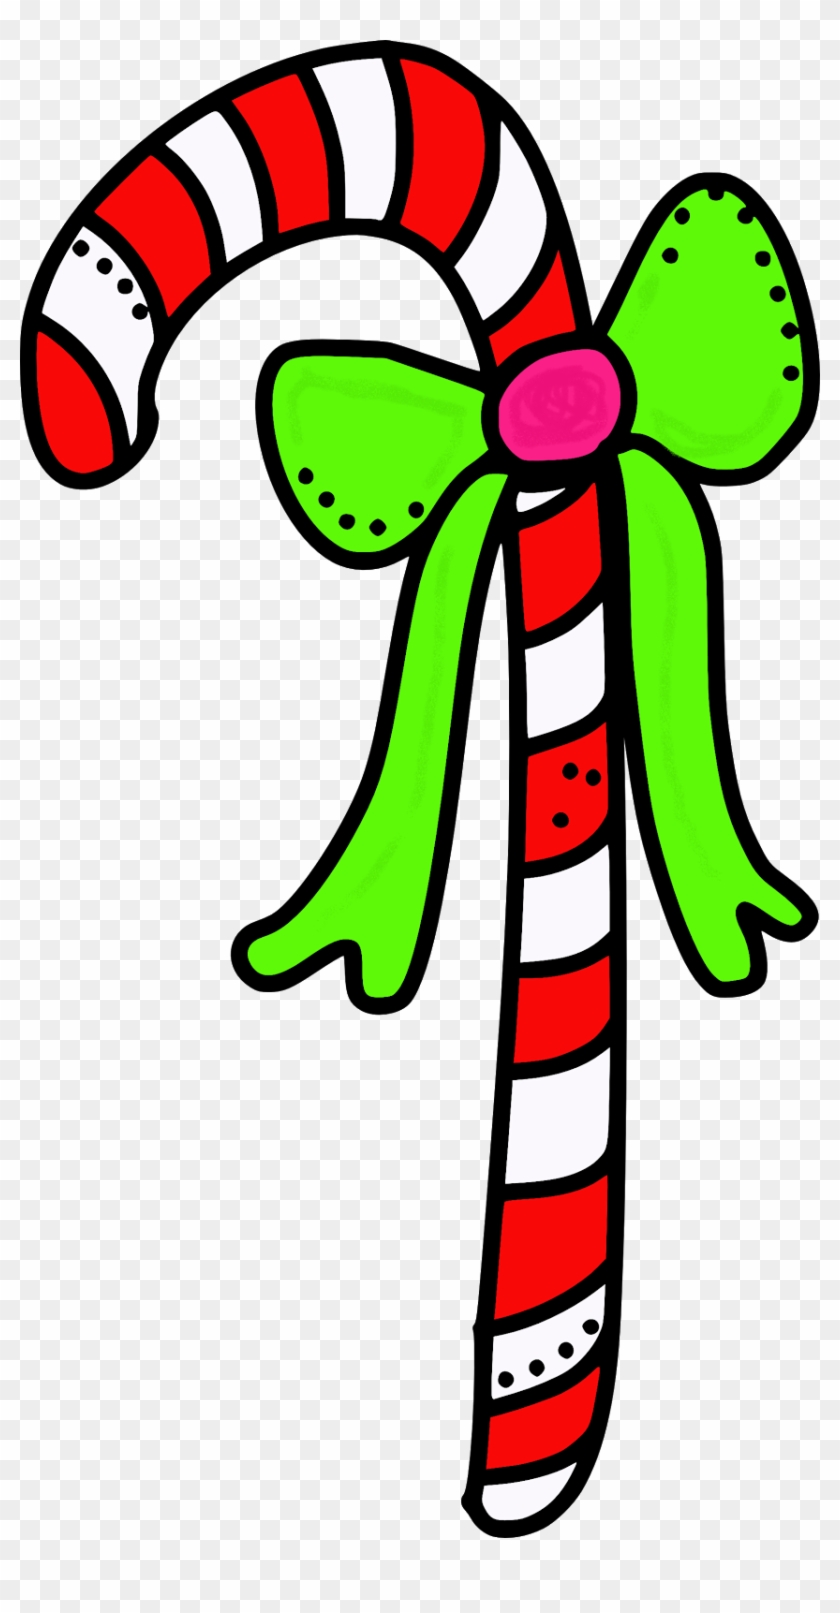 Grinch Clipart - Grinch Clipart Png #8822